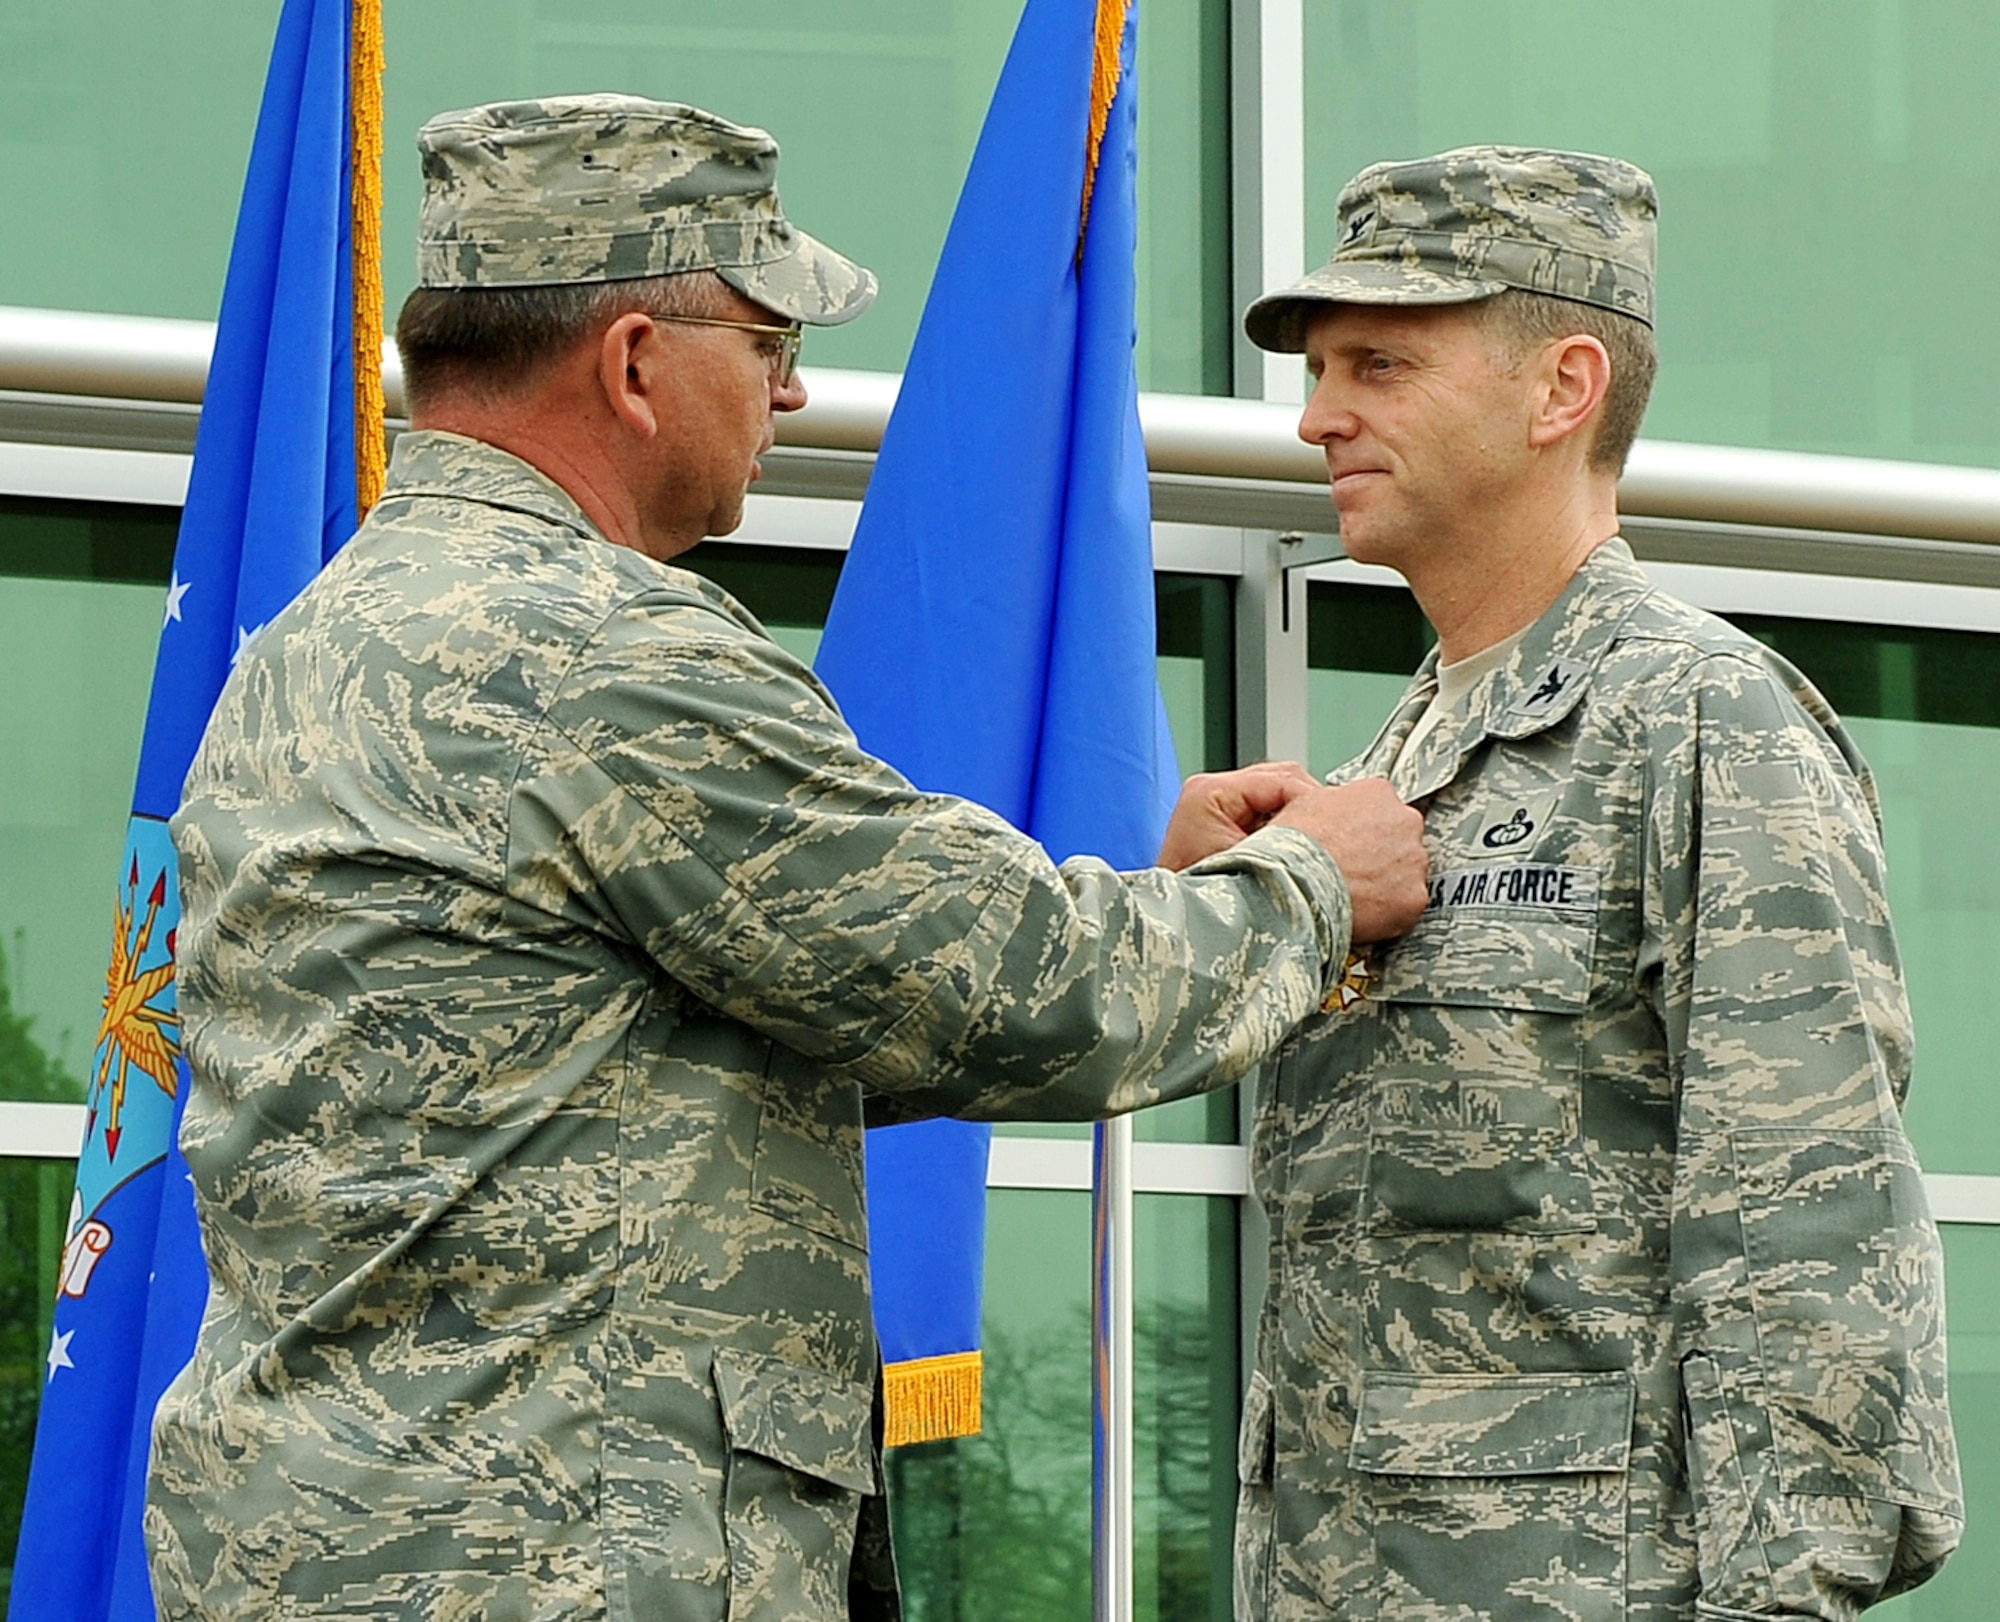 OFFUTT AIR FORCE BASE, Neb. -- Maj. Gen. Marke Gibson, Air Force director of operations and deputy chief of staff for operations, plans and requirements, pins the Legion of Merit medal on Col. John D. Murphy, outgoing Air Force Weather Agency commander, during a change of command ceremony here in front of the Lt. Gen. Thomas S. Moorman building April 20. The agency is comprised of more than 1,400 active-duty members, civil service employees and contractors at 14 operating locations around the world which provide centralized weather products and services, including climatological and space weather support to all branches of the armed forces. U.S. Air Force photo by Charles Haymond